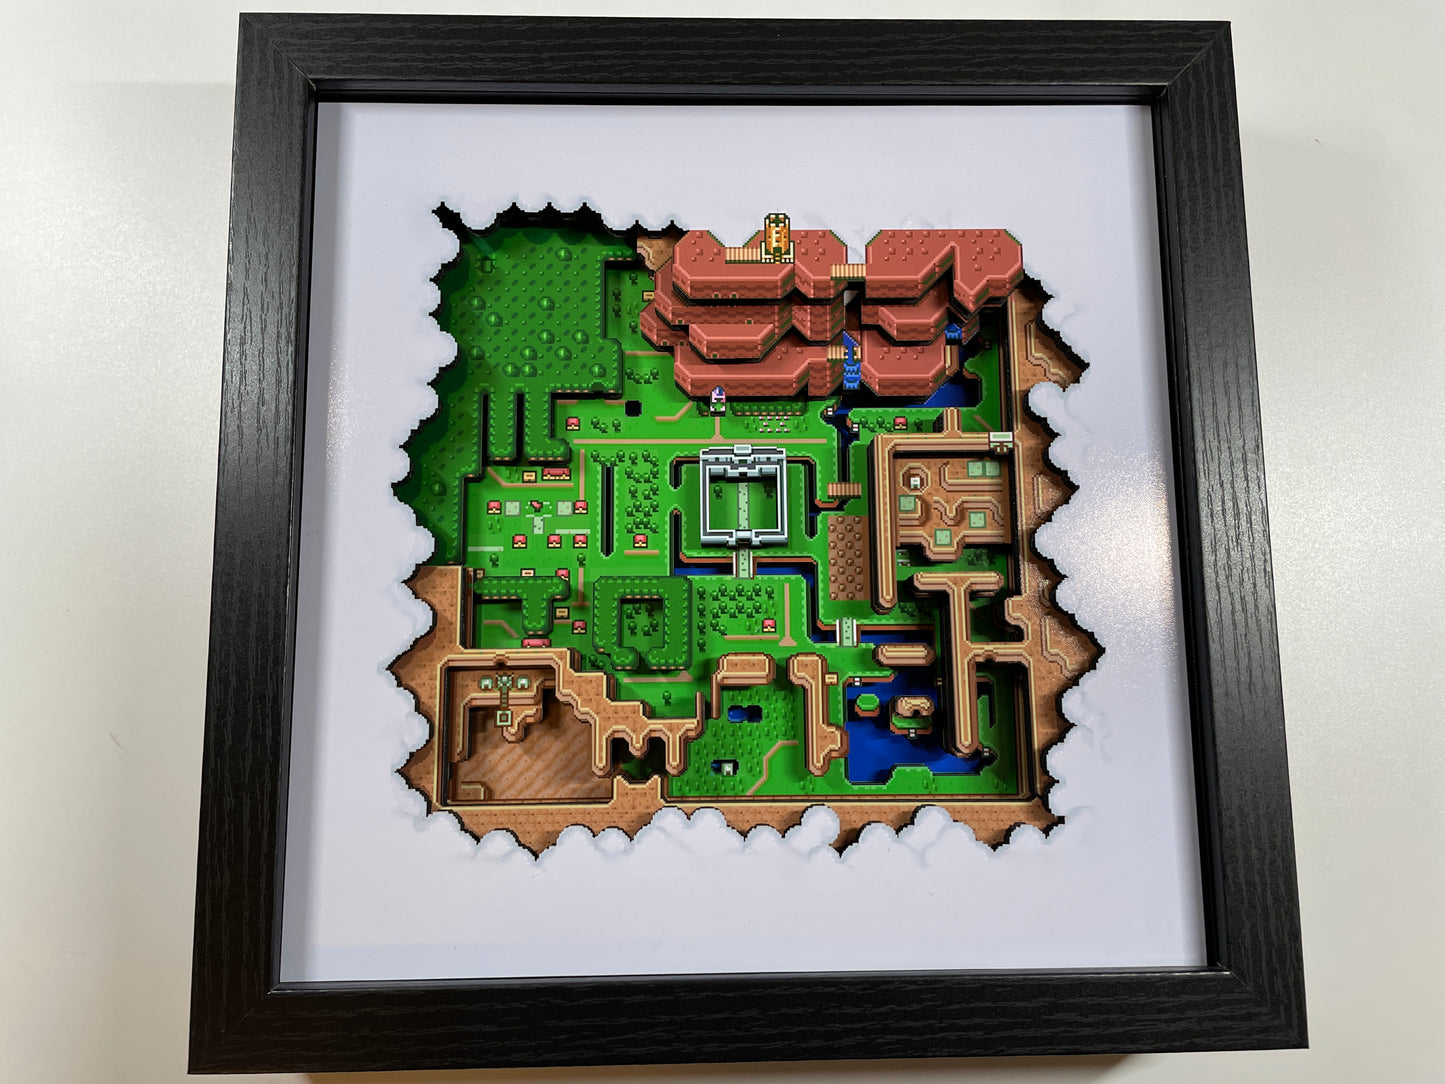 Legend of Zelda: A Link to the Past - Hyrule Map - The Light World 9x9 3D Shadow Box!